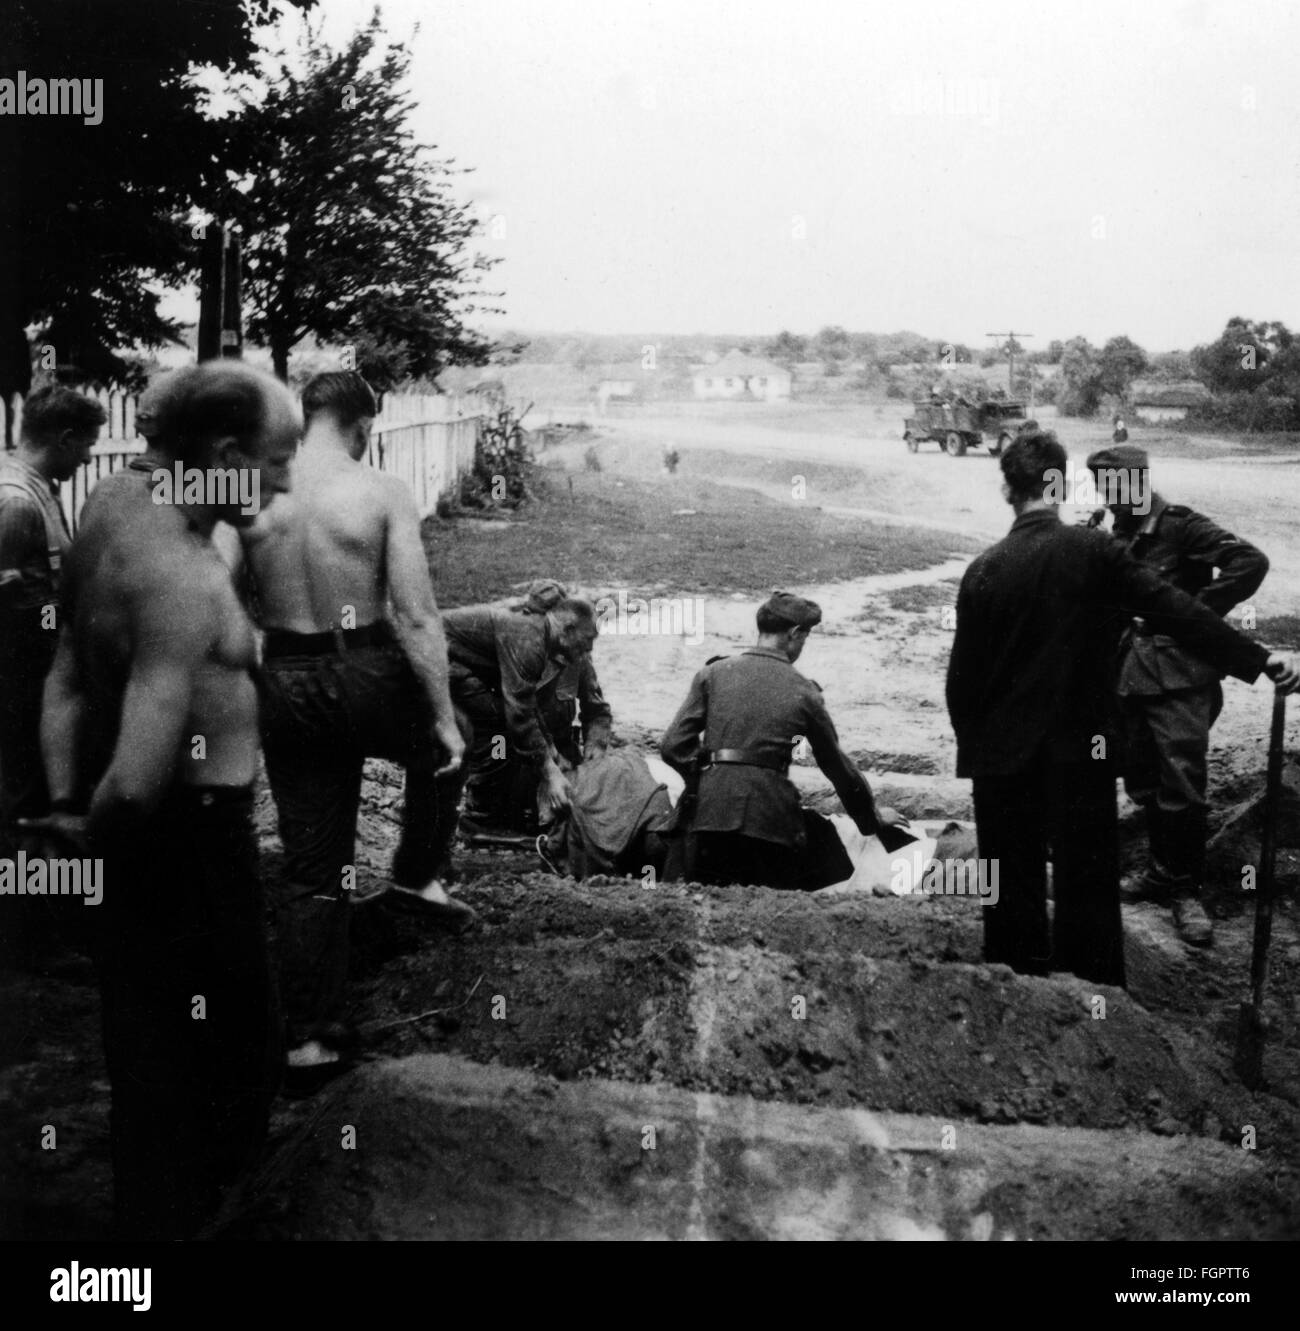 National Socialism / Nazism, organisations, Reichsarbeitsdienst (Reich Labour Service), members of a Reichsarbeitsdienst unit, deployed on the Eastern Front, dig graves for killed German soldiers, summer 1941, Additional-Rights-Clearences-Not Available Stock Photo